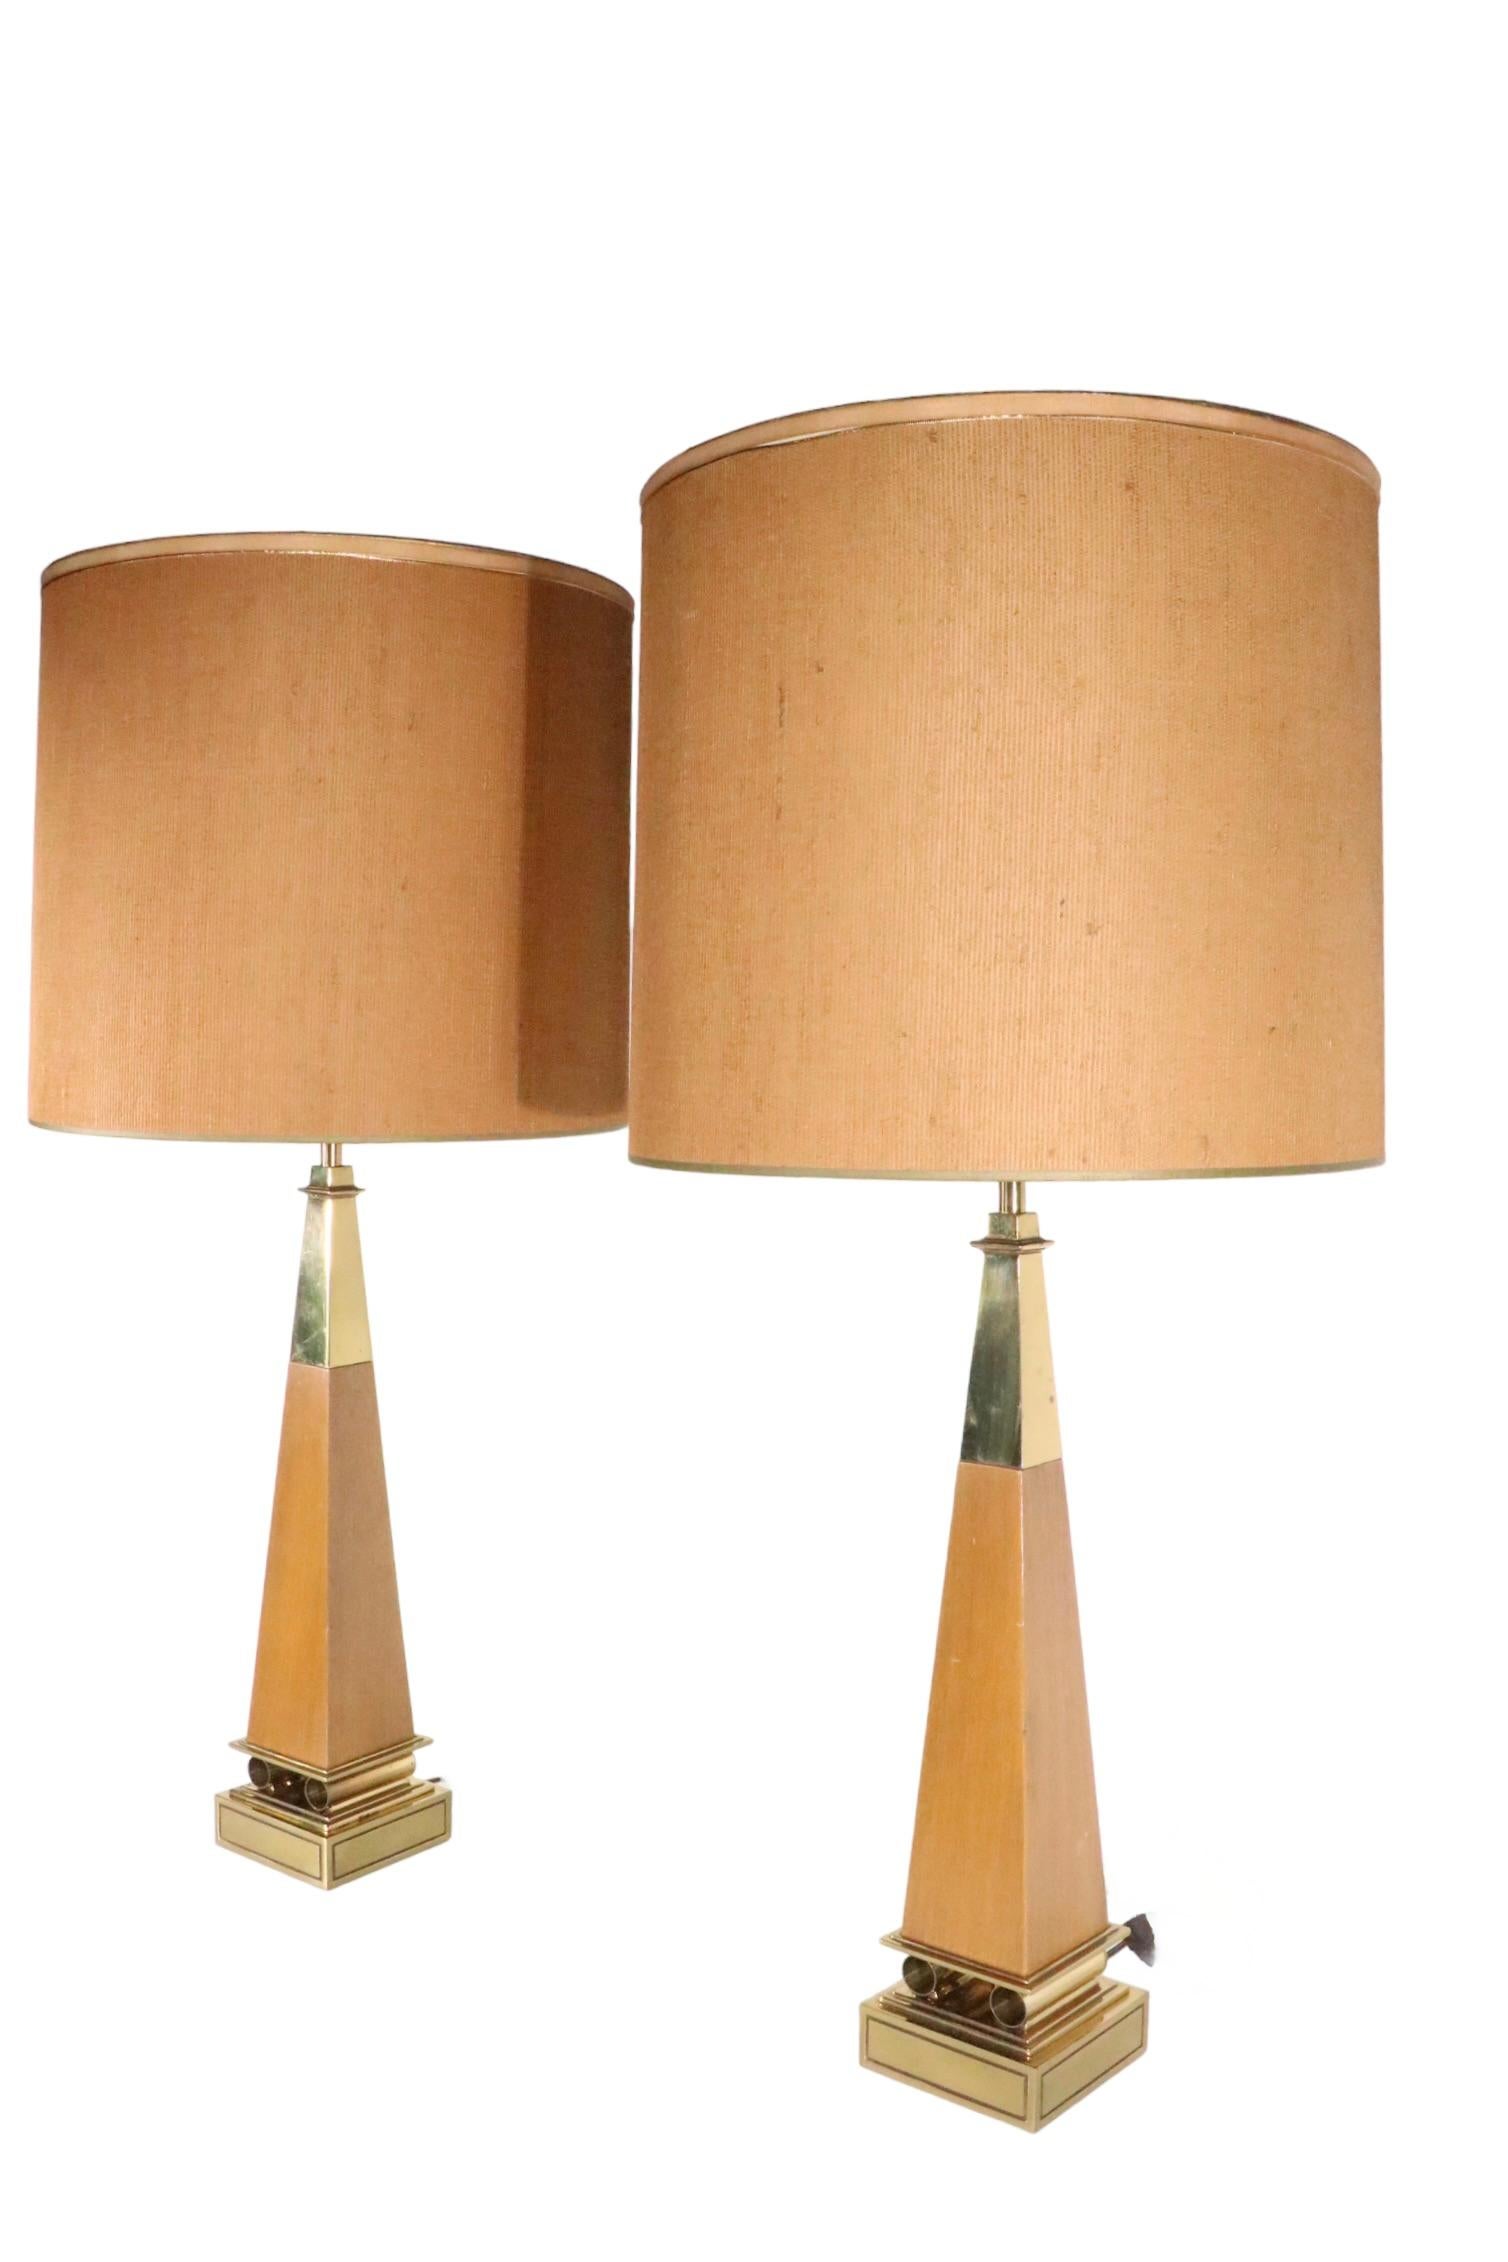 Wonderful pair of obelisk form table lamps made by Stiffel, design attributed to Tommi Parzinger. The lamps are both in very good, original, clean and working condition, showing only light cosmetic wear, normal and consistent with age. Included are